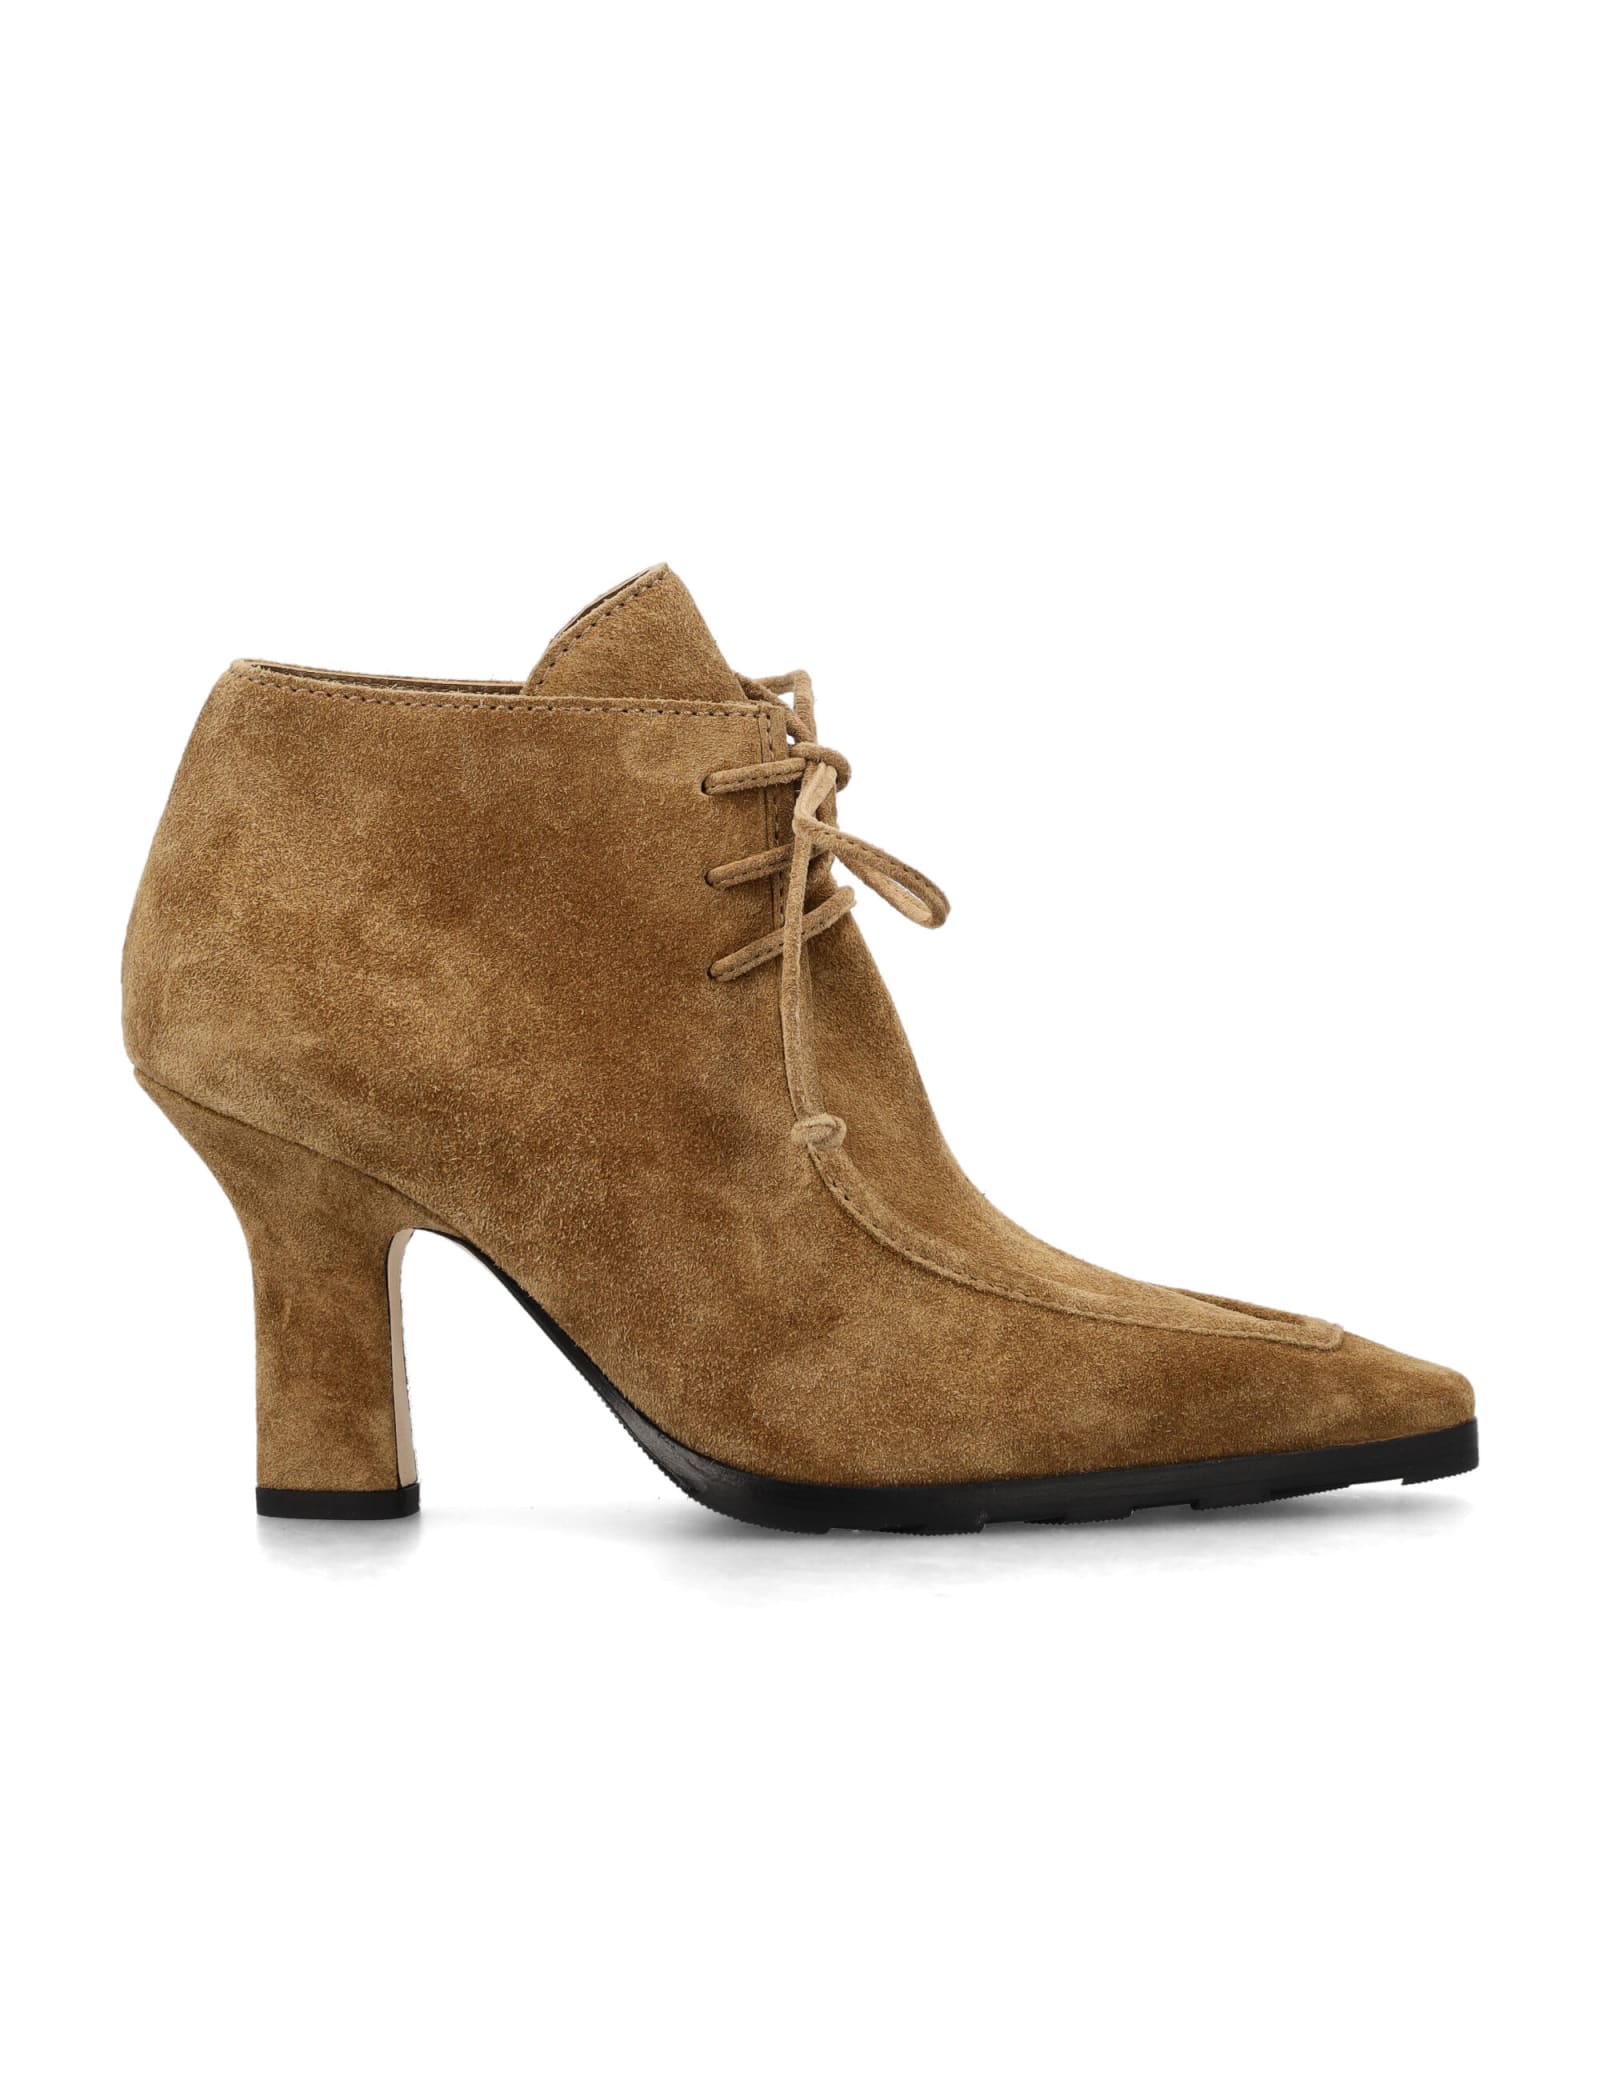 BURBERRY SOVEREIGN SUEDE LACE-UP BOOTIES